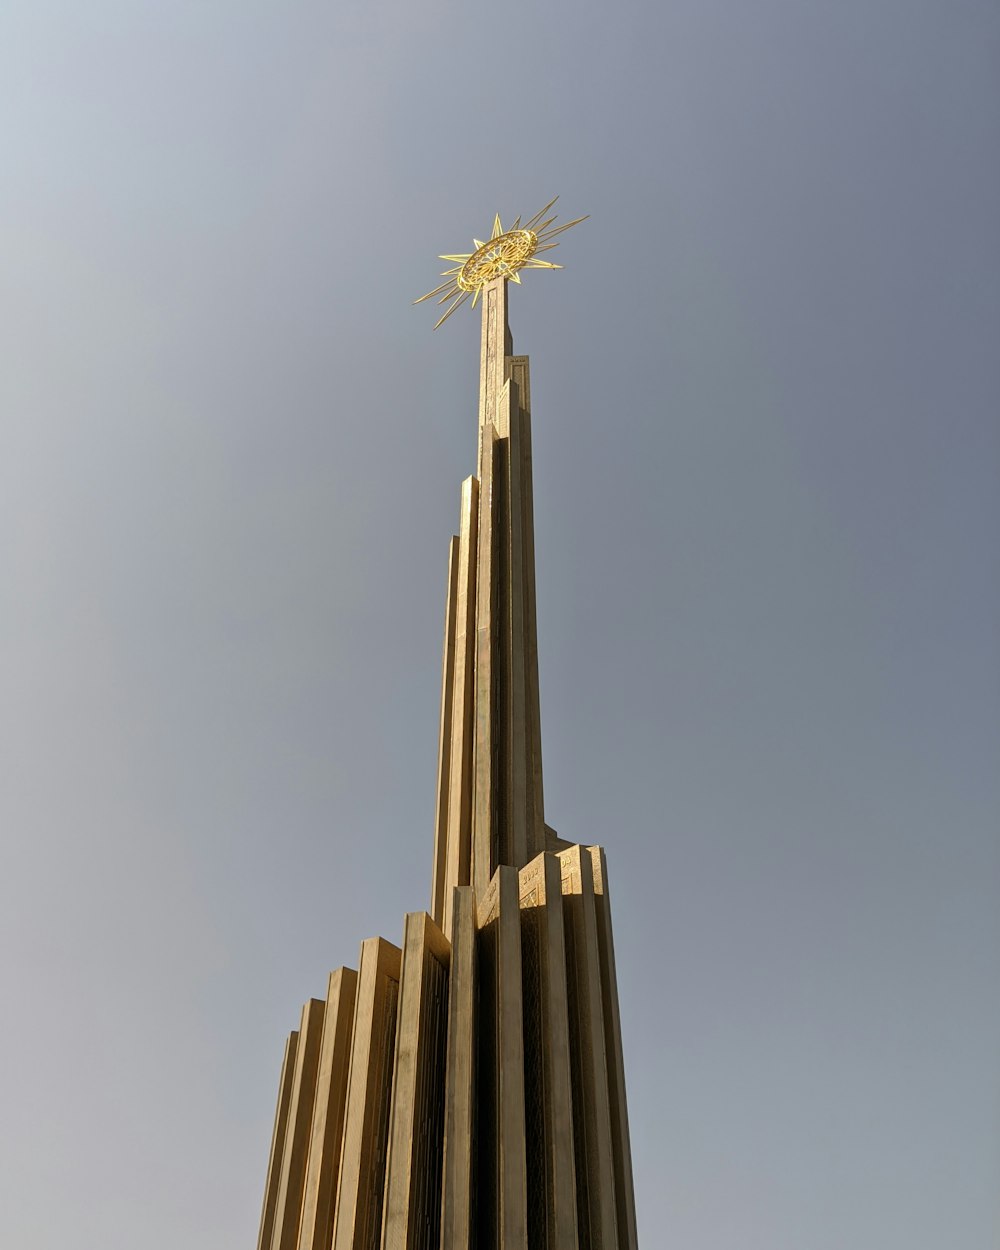 a very tall building with a cross on top of it